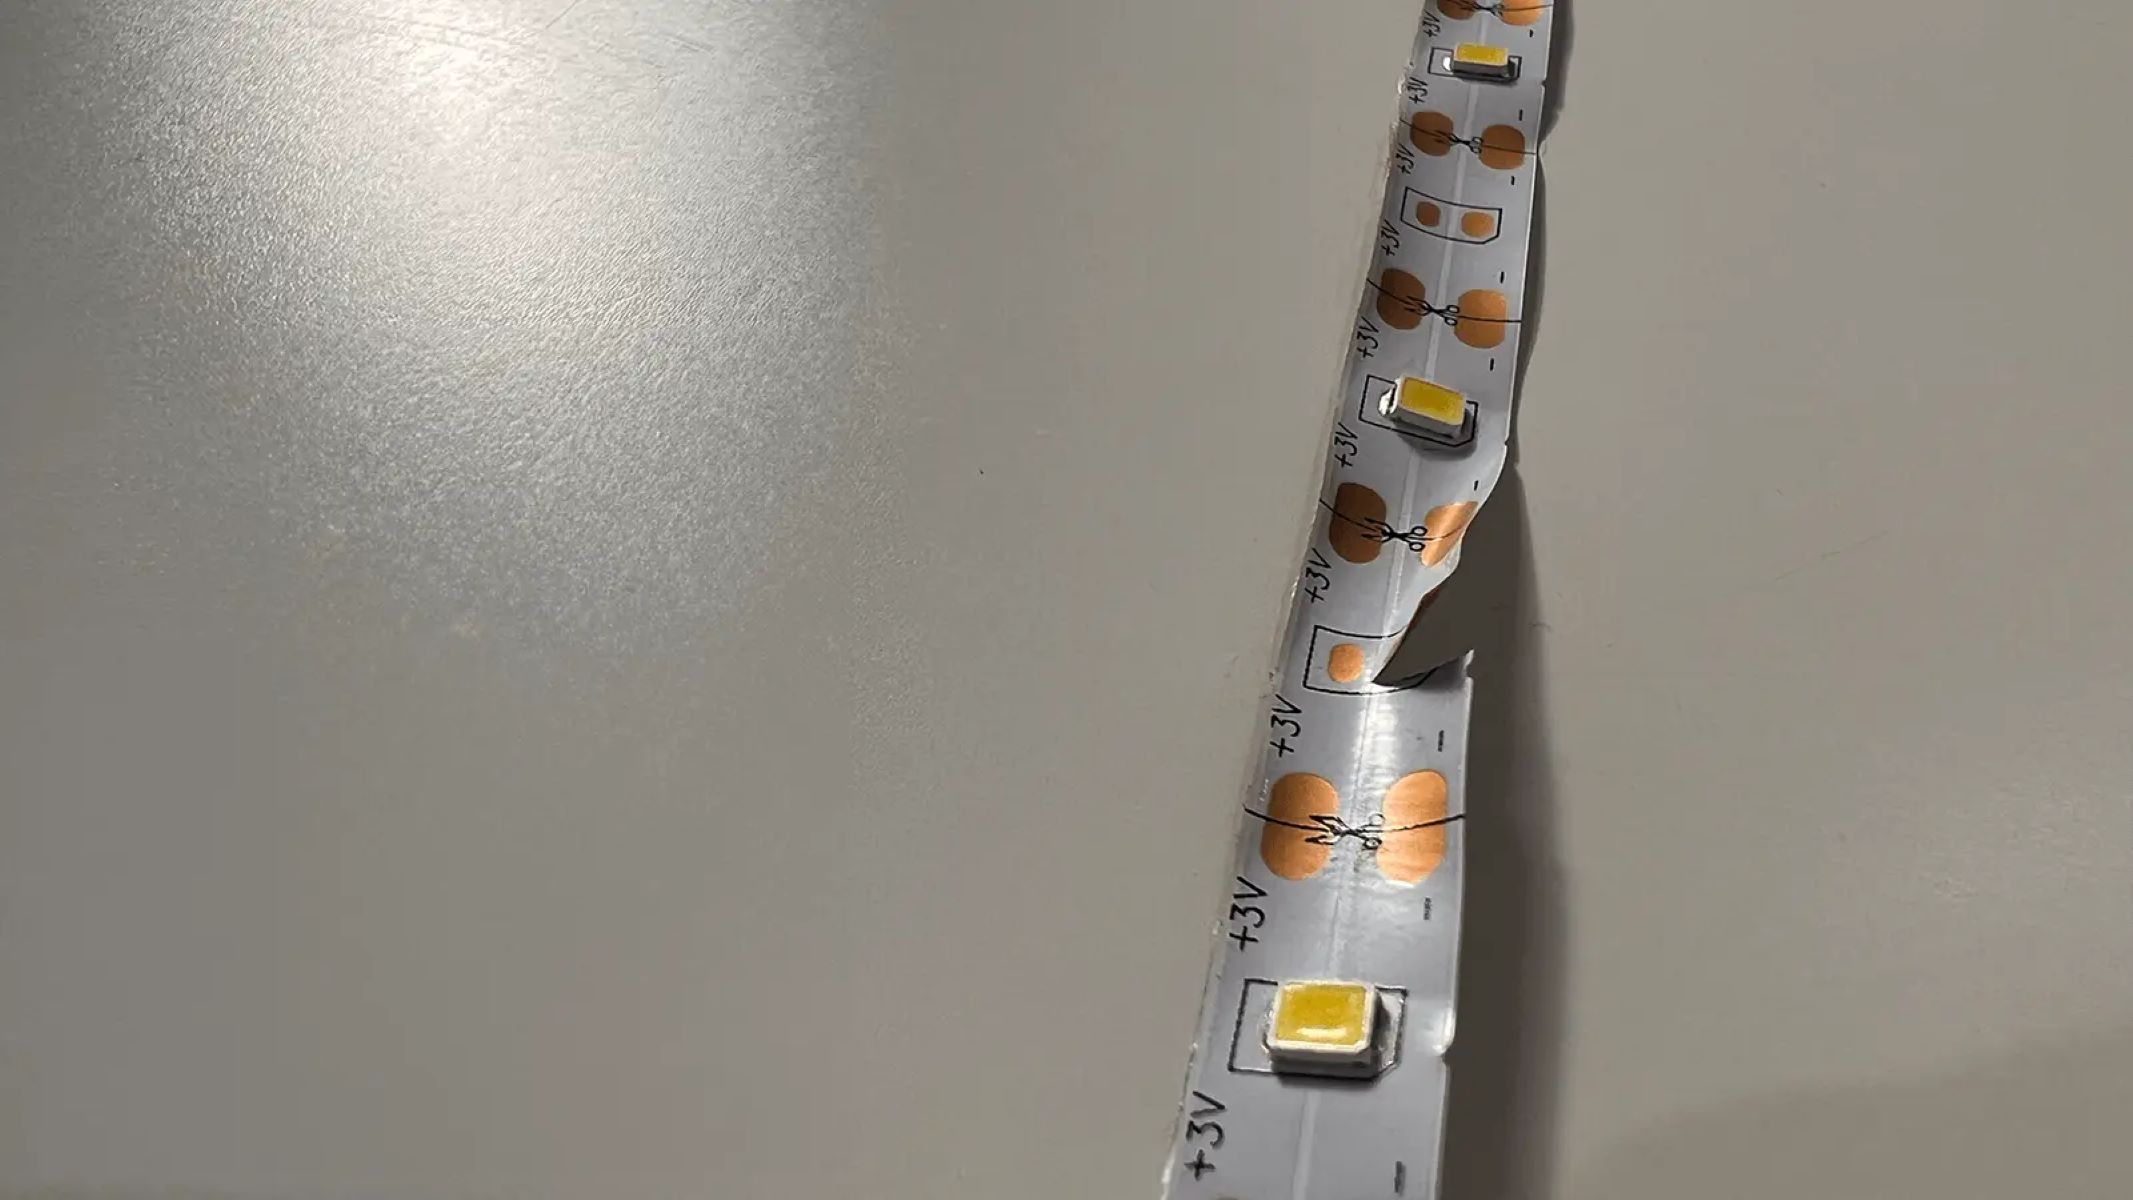 Quick And Easy Fix For Detached LED Light Strip – No Tools Needed!